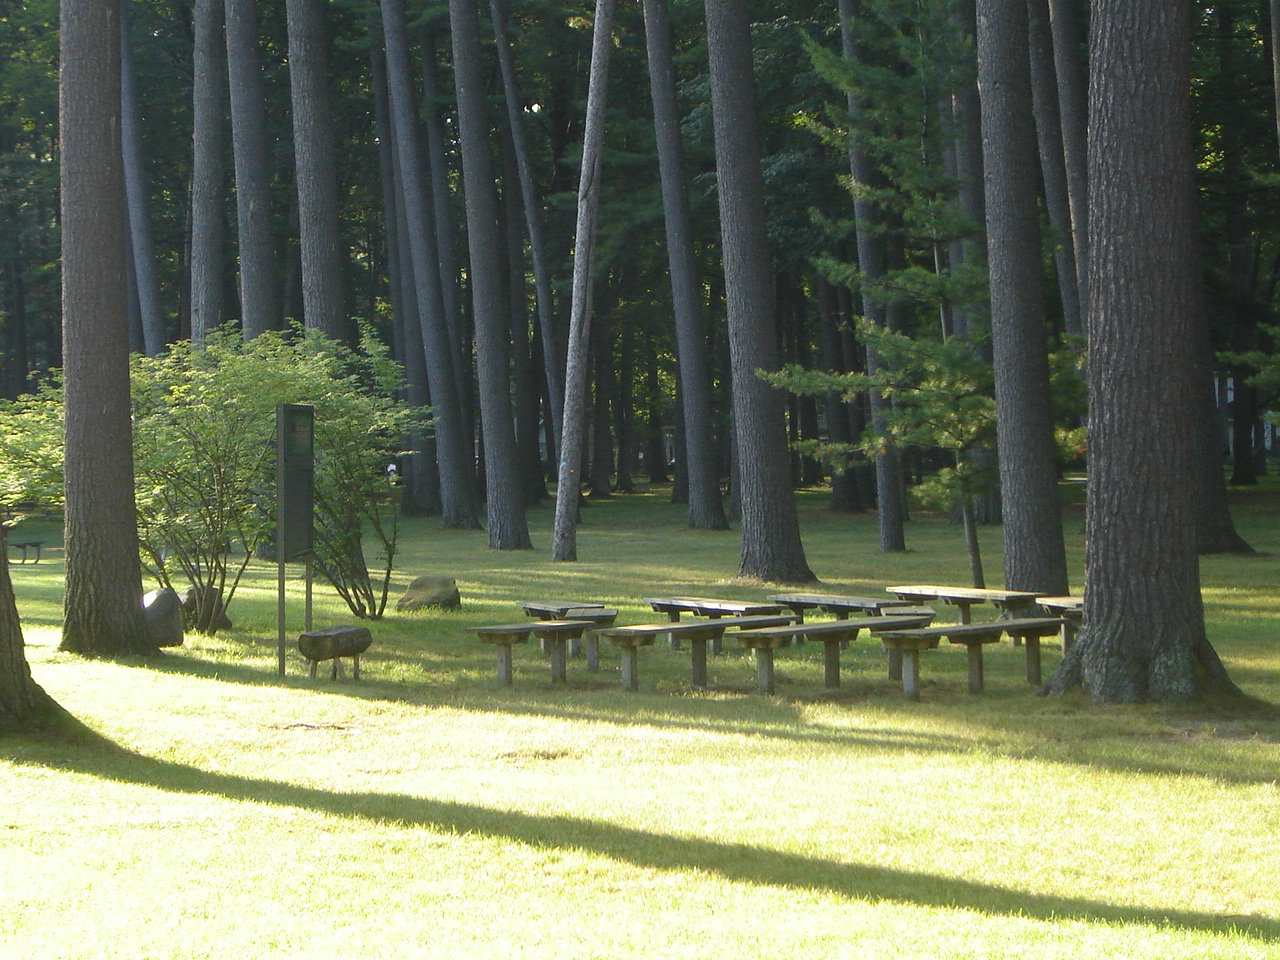 An outdoor classroom on the Northwestern Michigan College campus